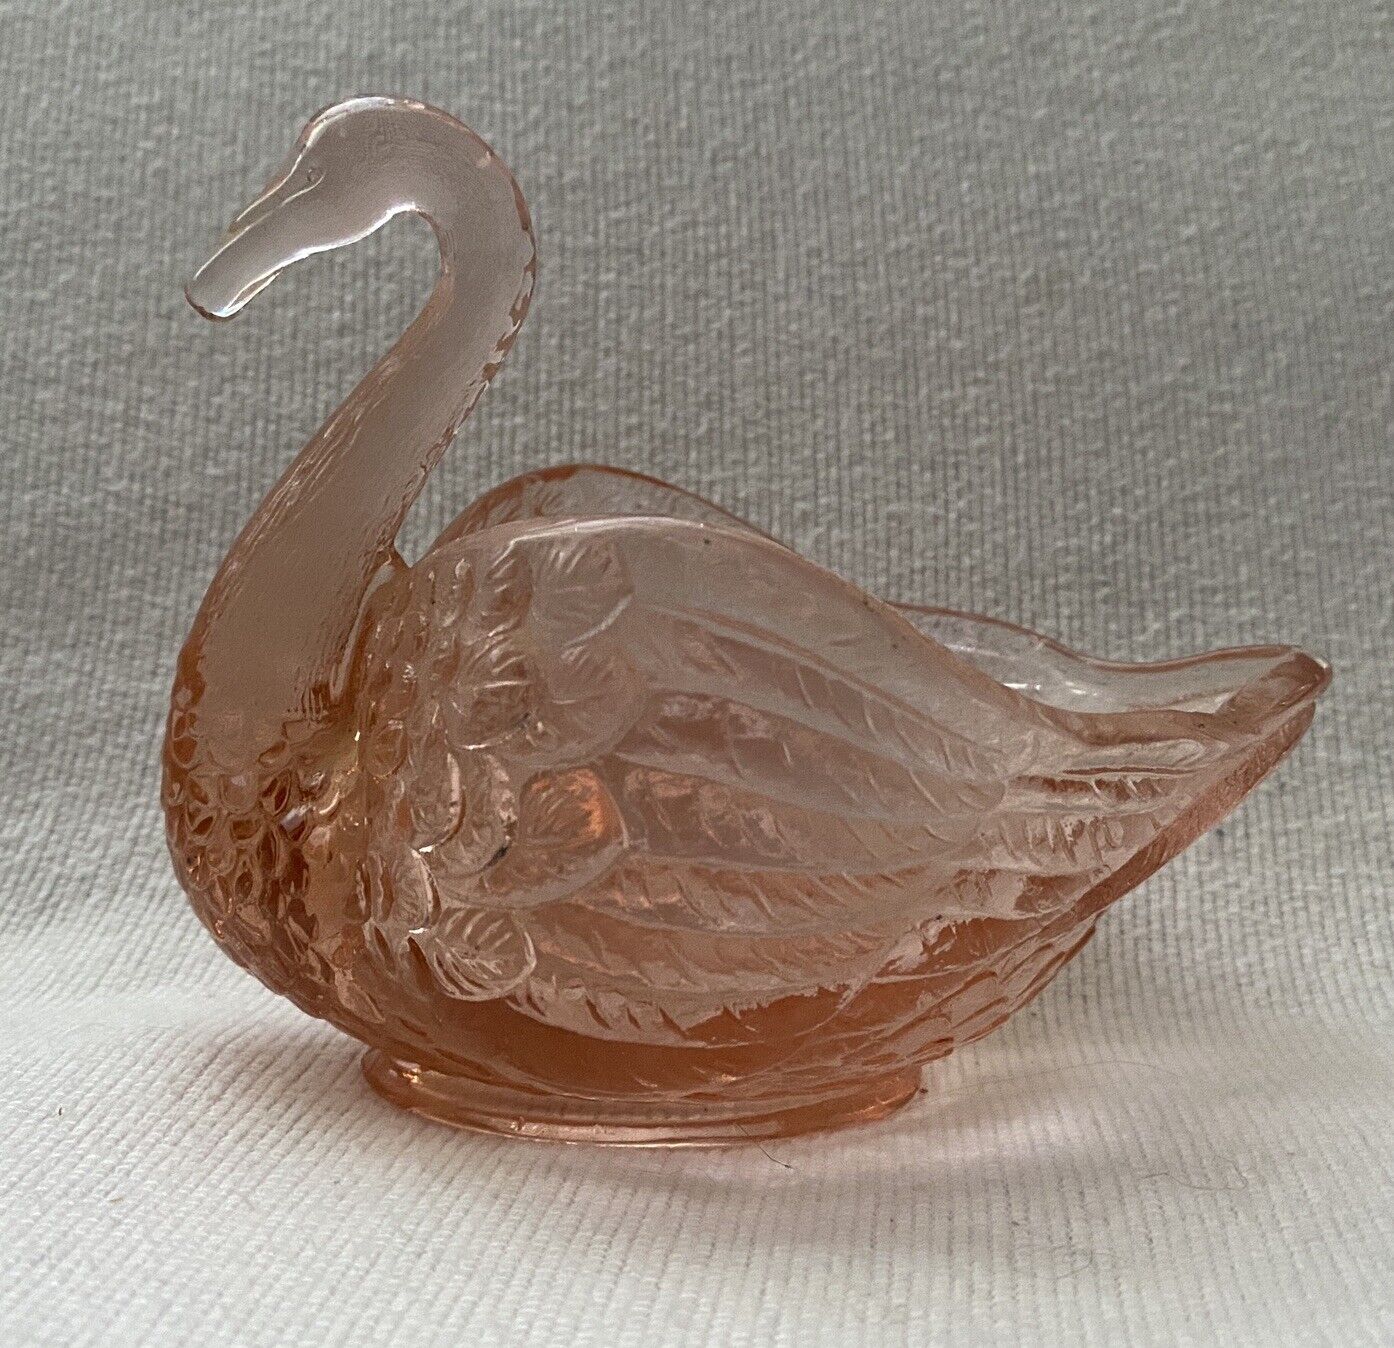 VTG Imperial Glass Dusty Rose Pink Swan Trinket Candy Heart Shaped Dish Bowl